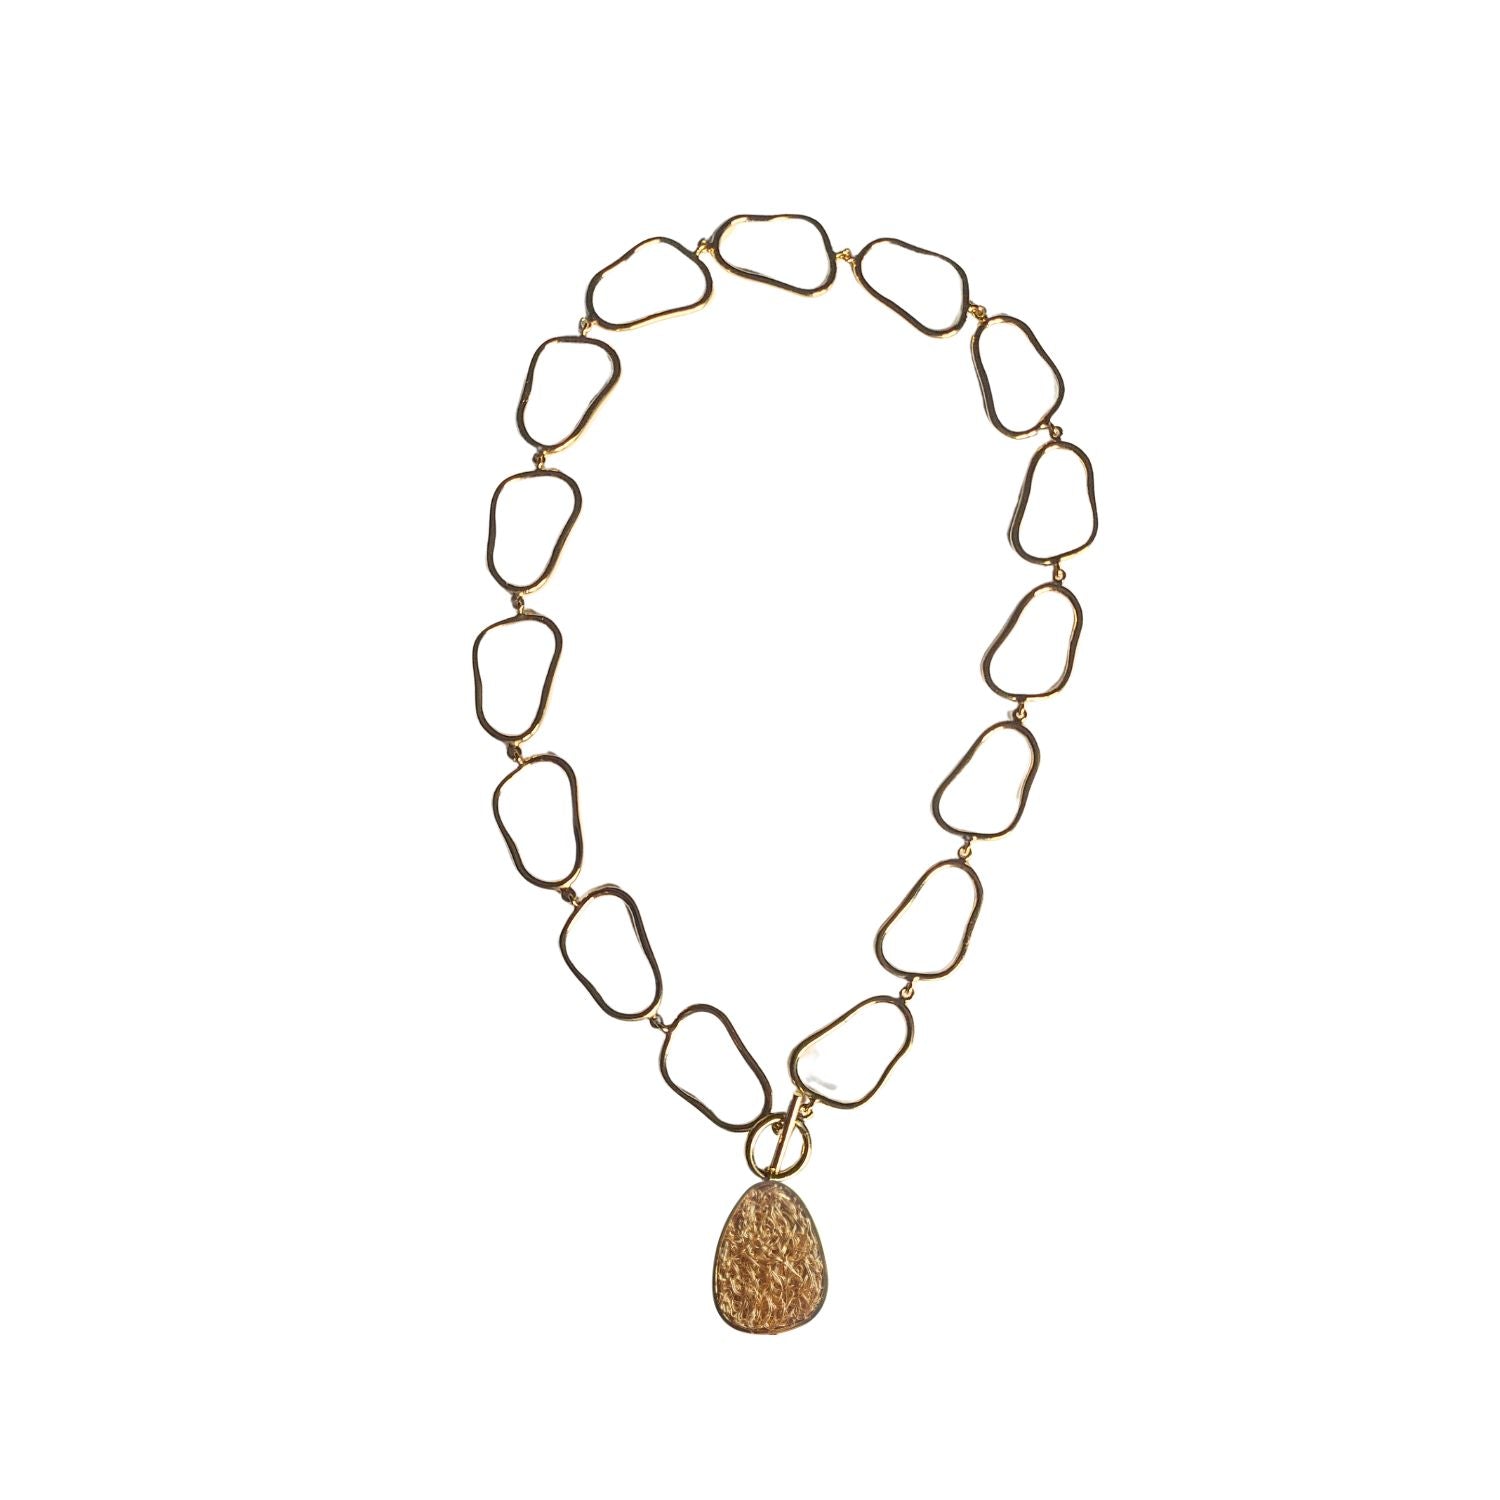 Sleek and contemporary gold/green necklace with a unique pendant, making a statement in modern fashion.